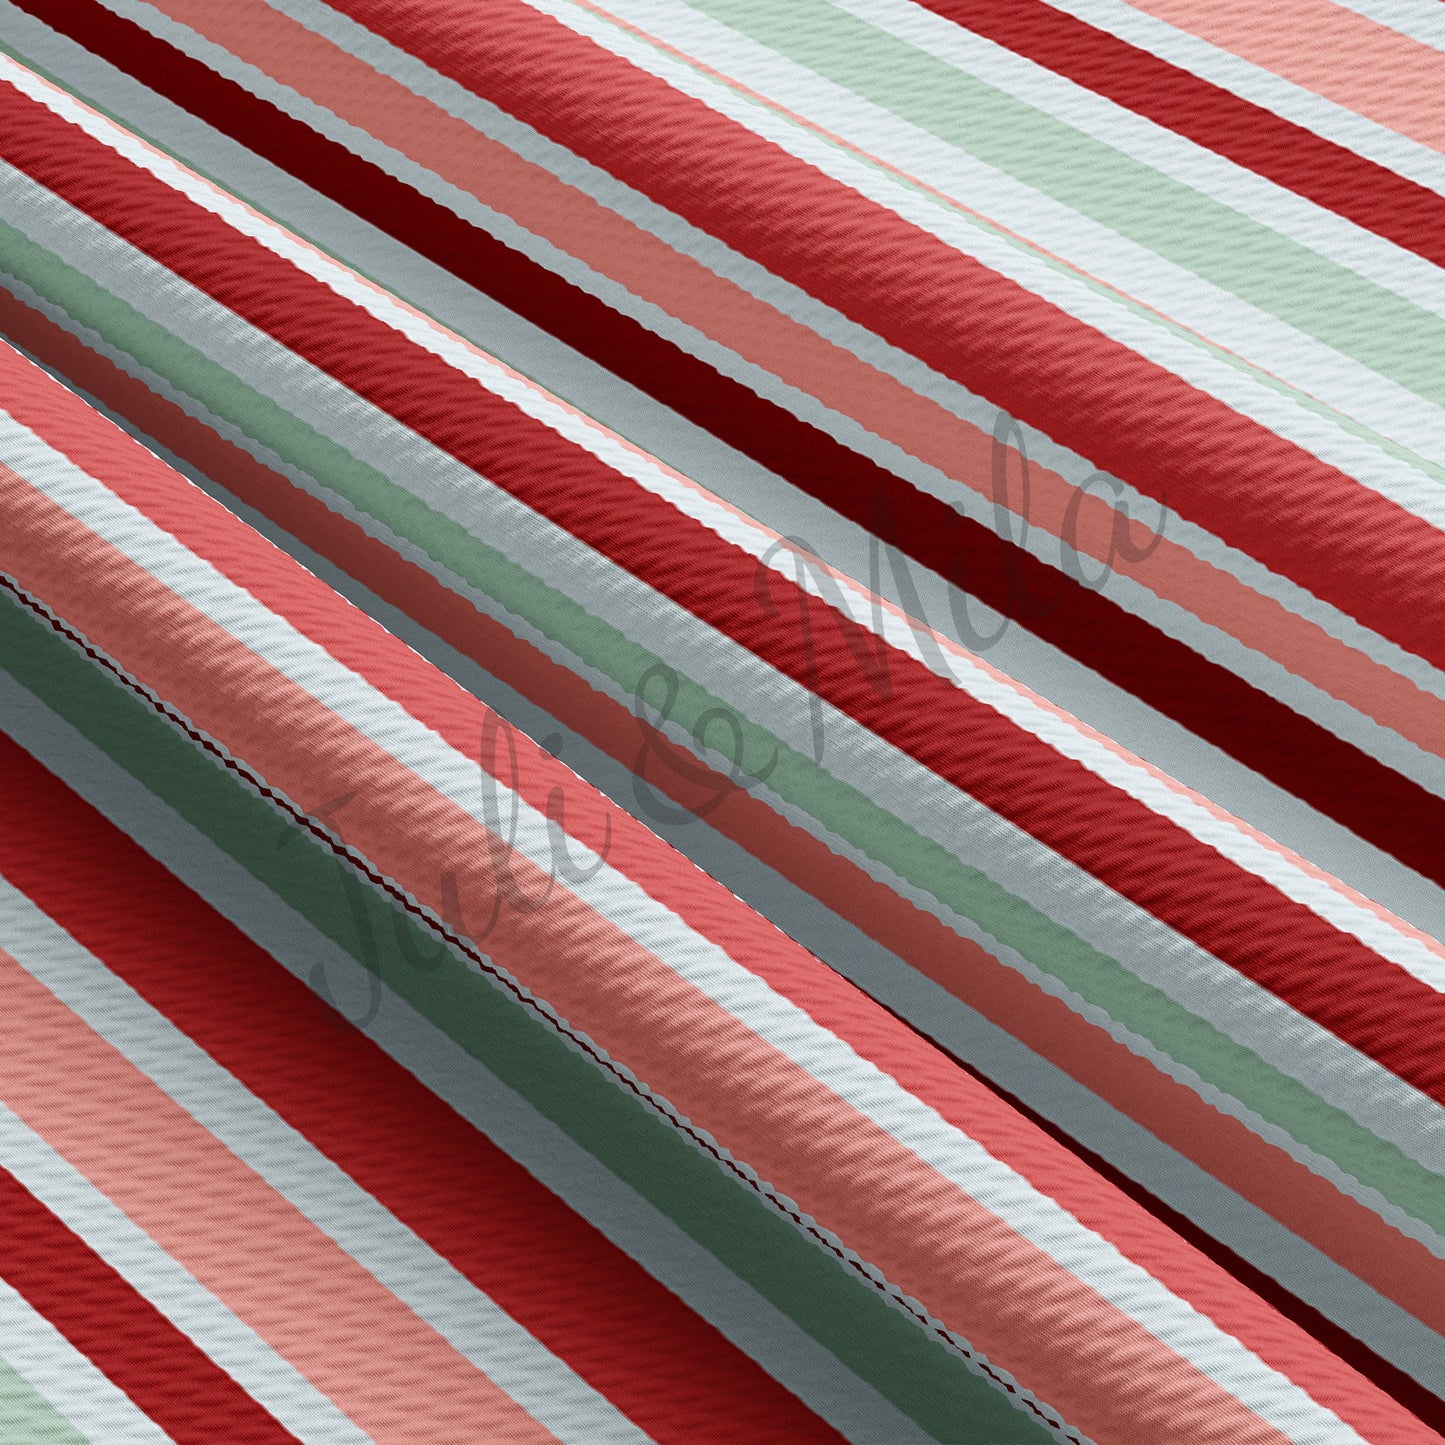 Printed Liverpool Bullet Textured Fabric by the yard 4Way Stretch Solid Strip Thick Knit Jersey Liverpool Fabric stripes5